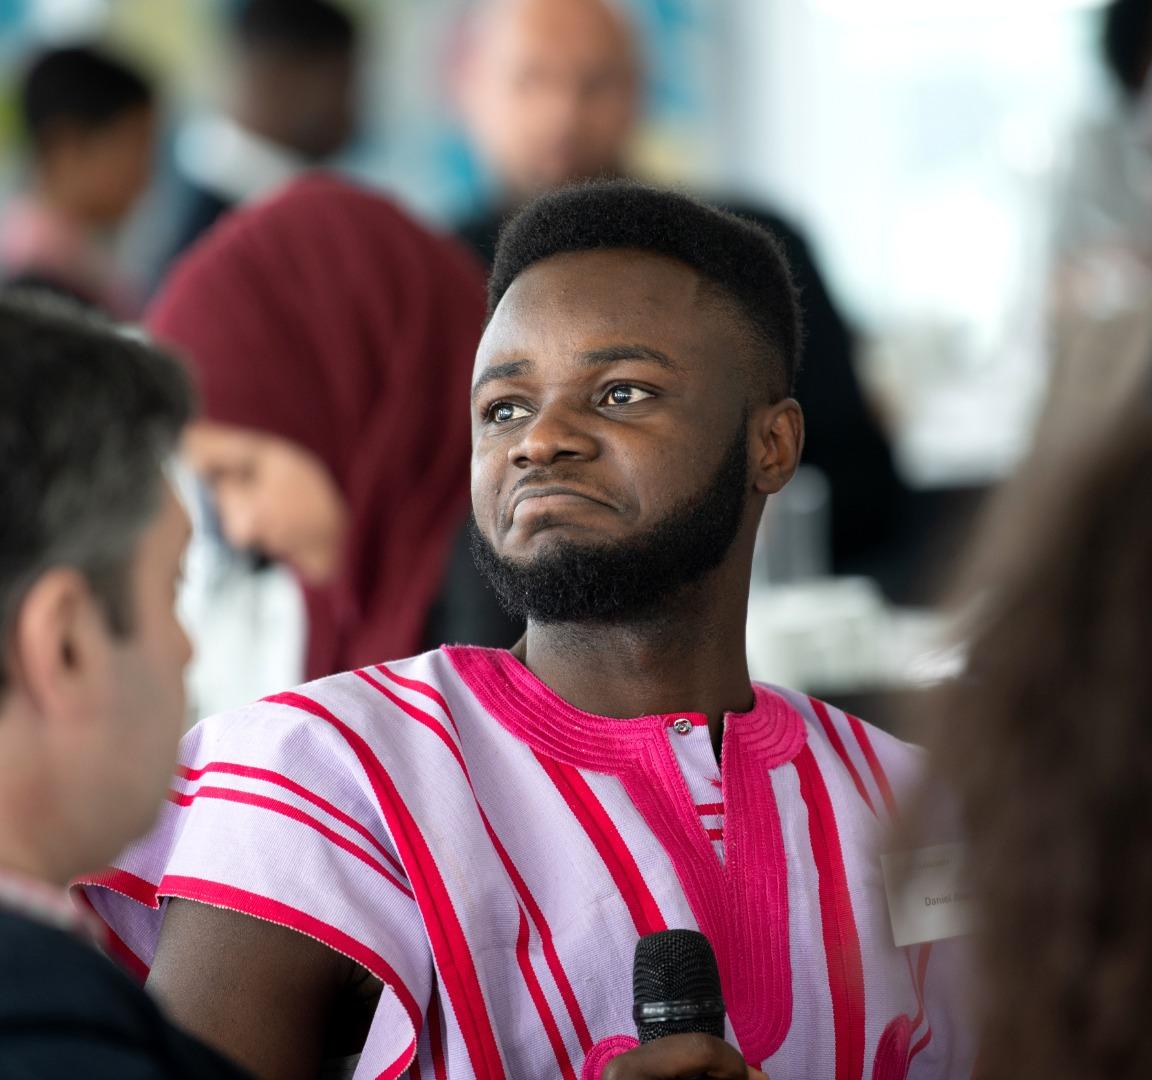 How Dan turned his passion for inclusion into a platform for LGBTQ+ Africans and asylum seekers